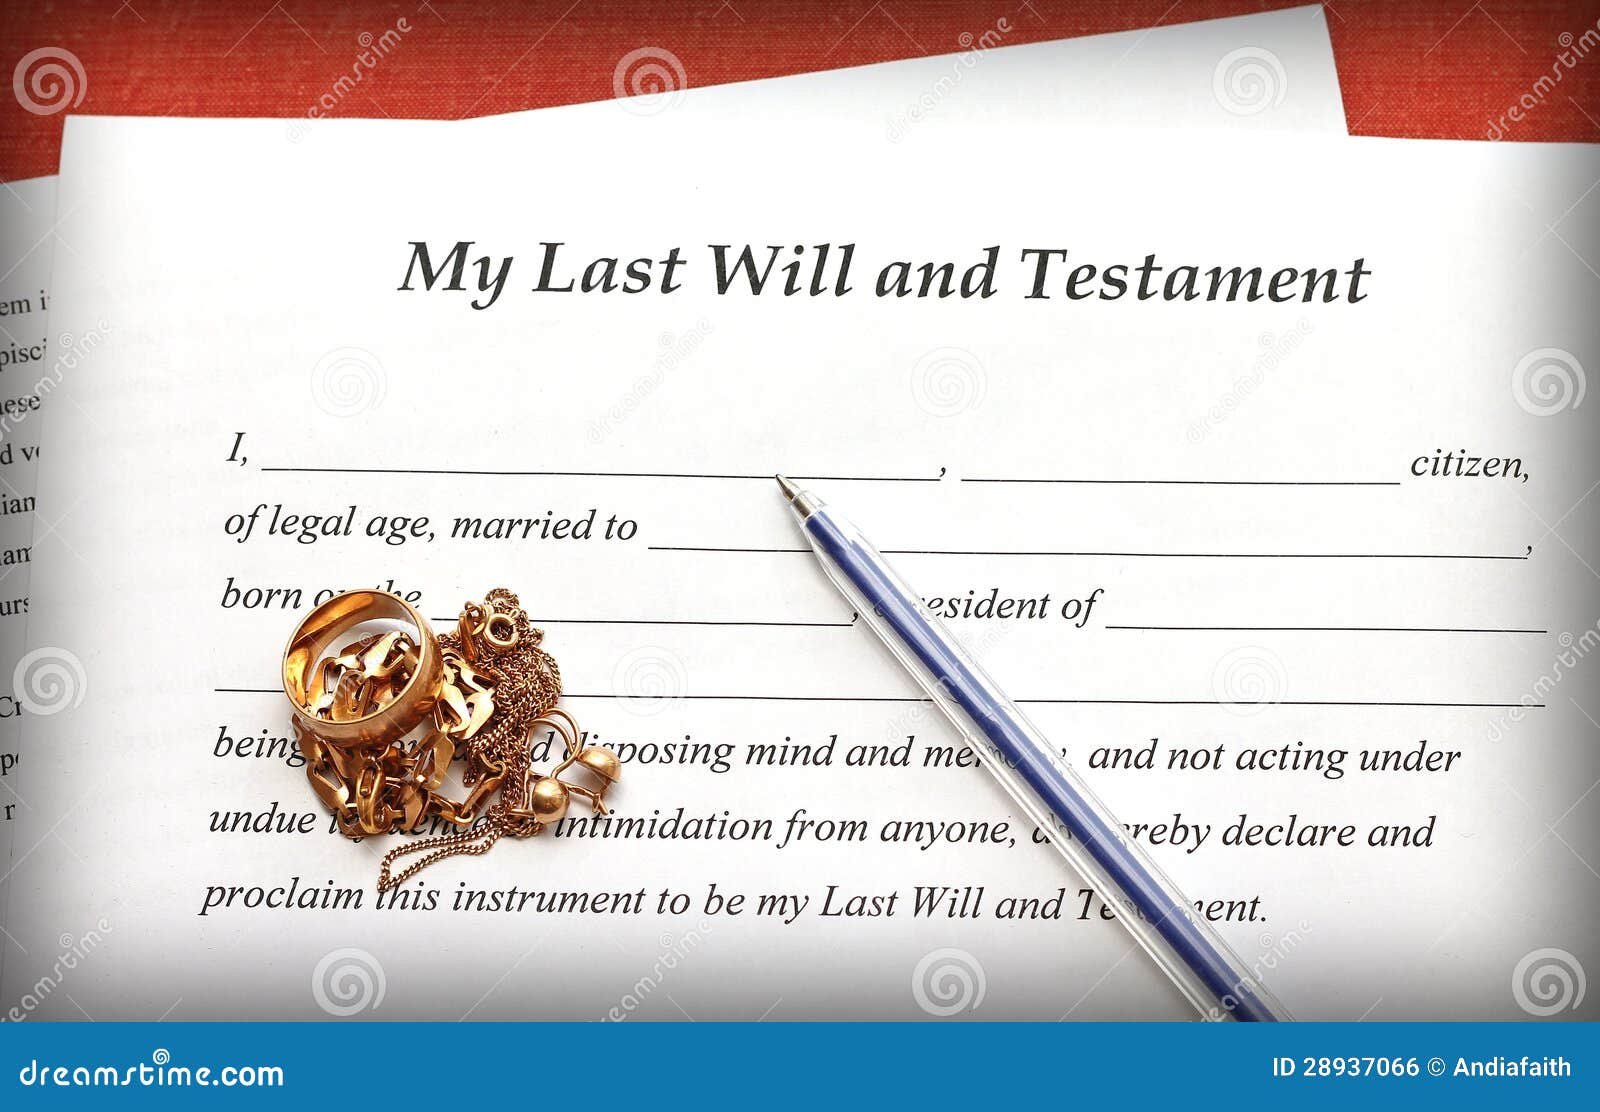 last-will-and-testament-form-with-gold-jewelry-on-red-background-royalty-free-stock-image